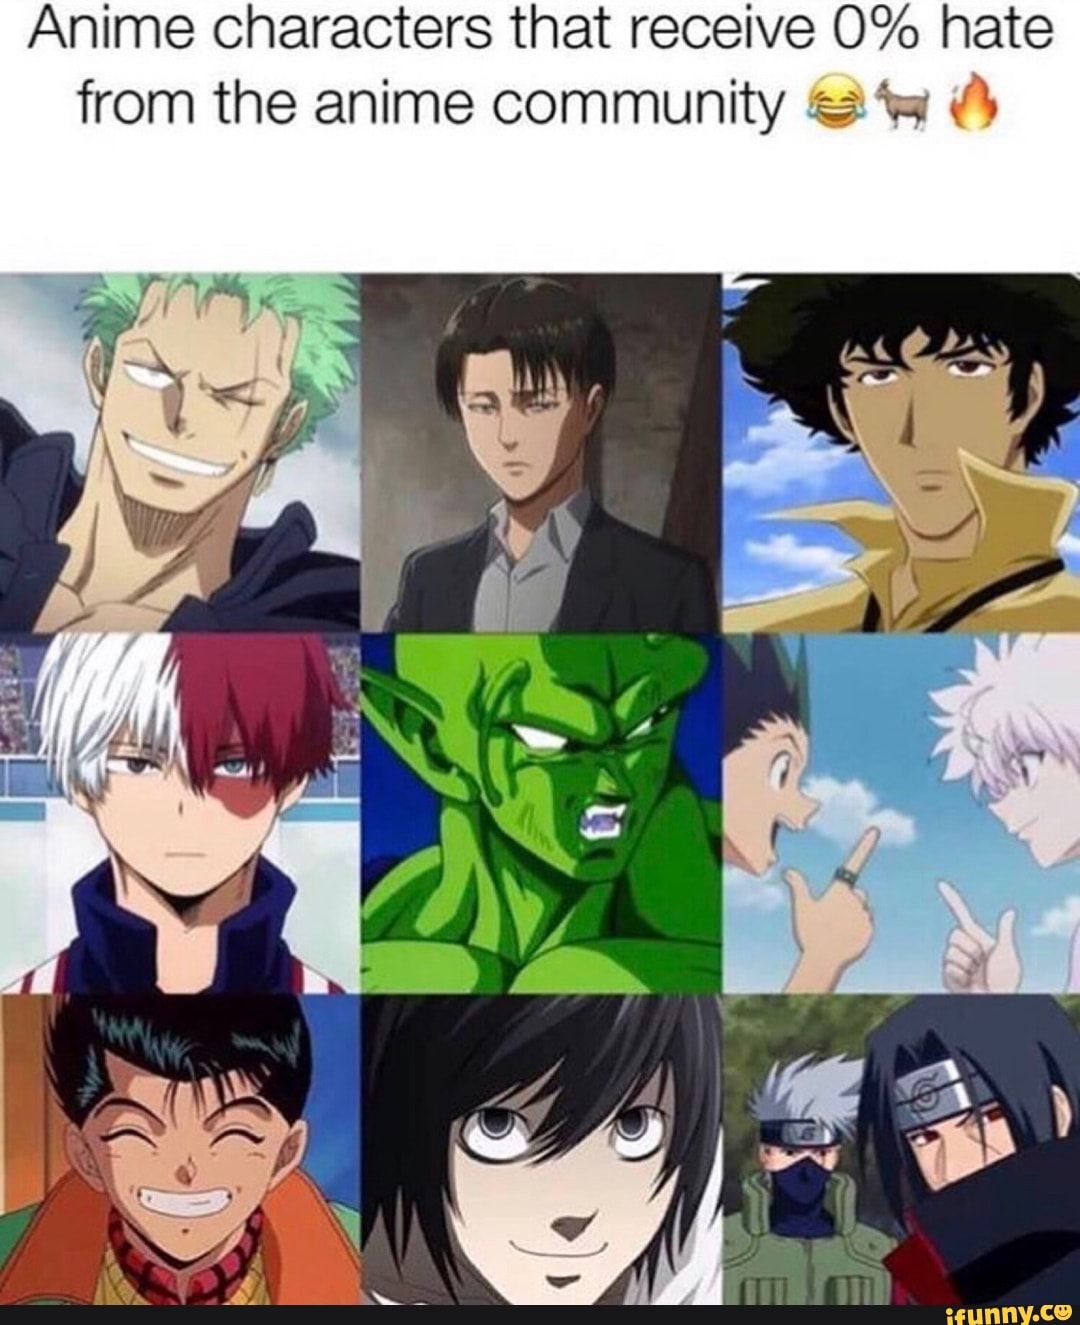 Anime characters that receive 0% hate from the anime community a &: «fª ...